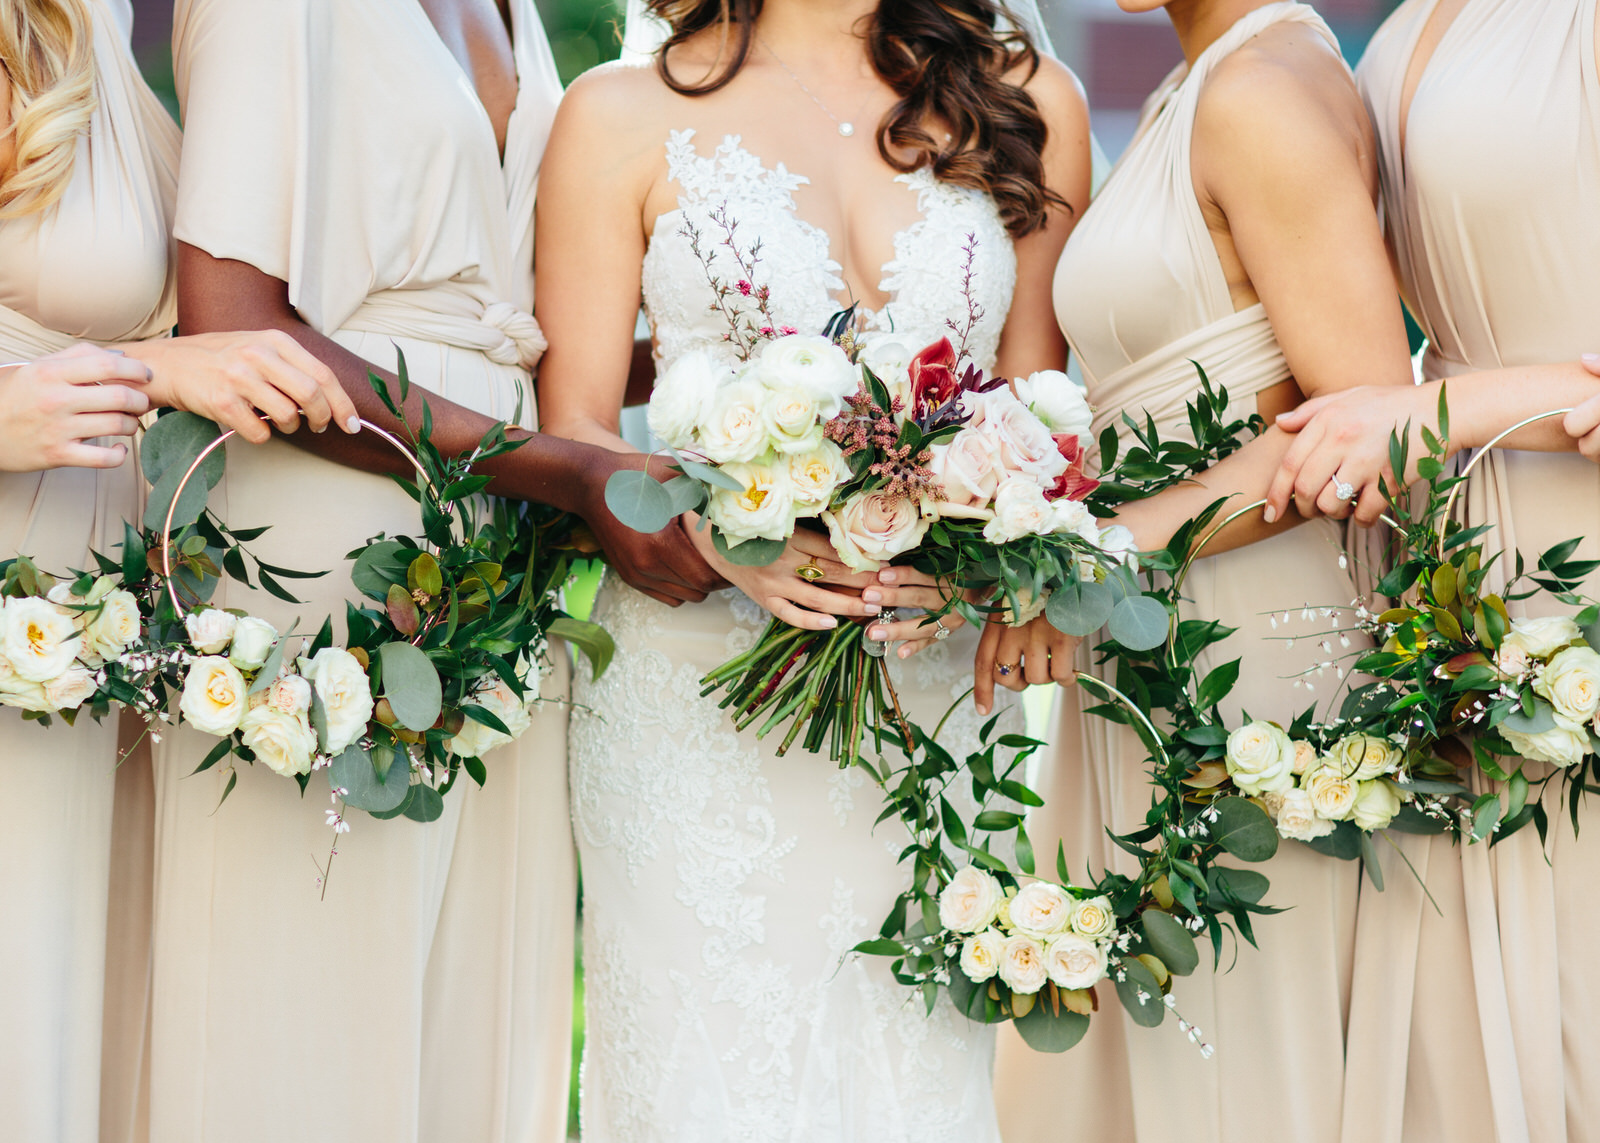 Bride bouquet with bridesmaids floral rings